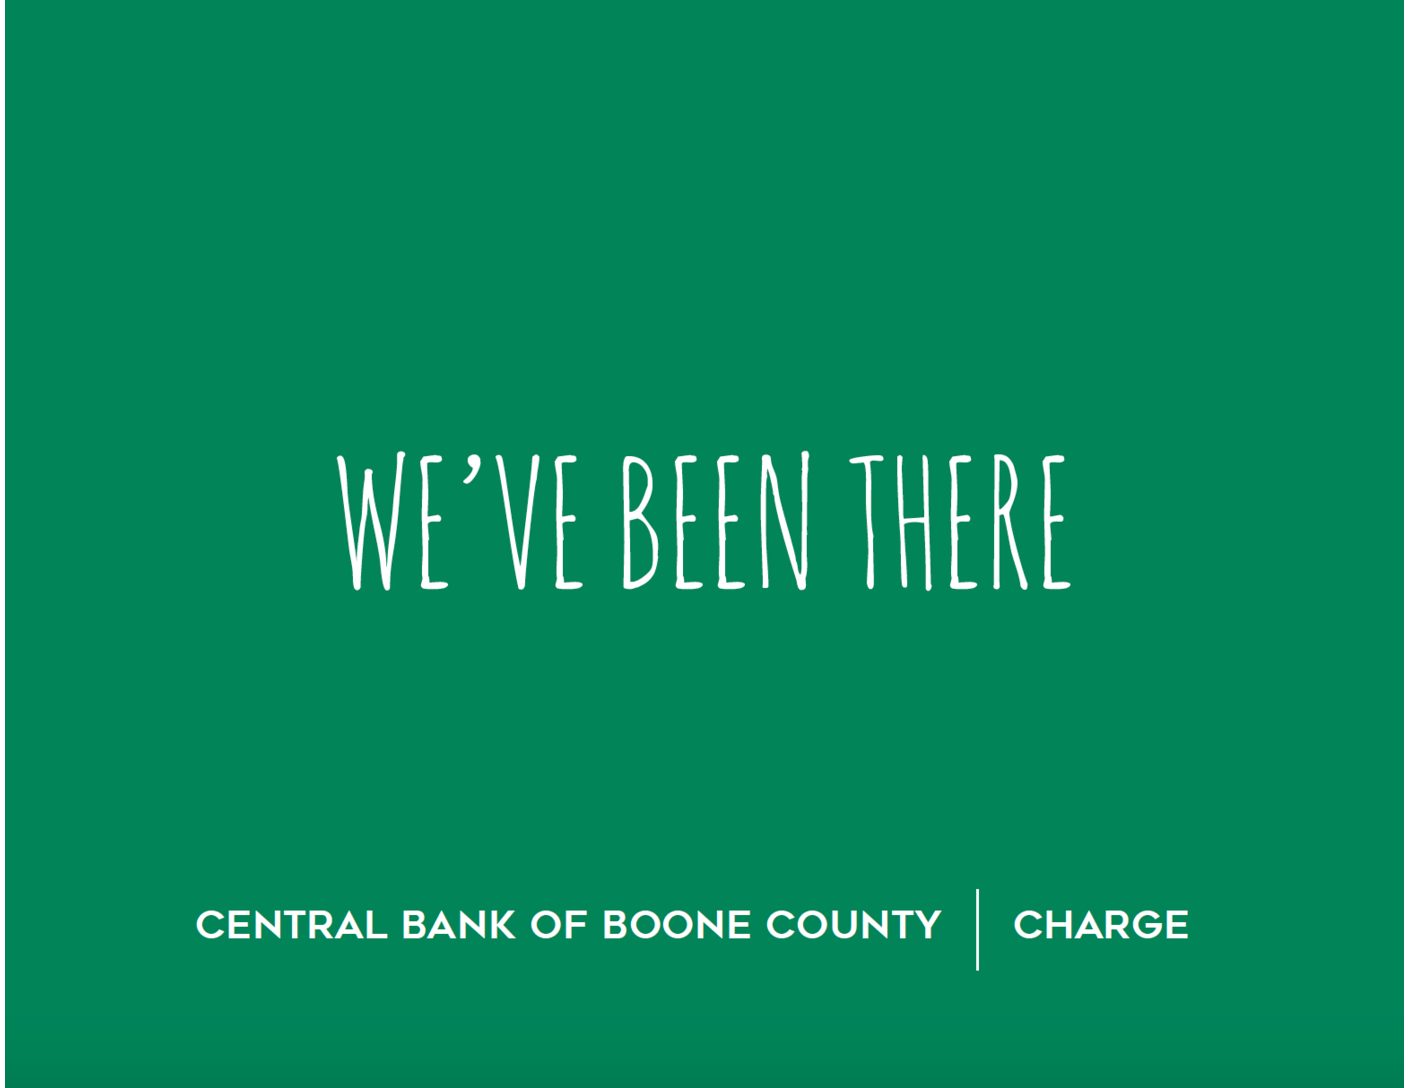 Central Bank of Boone County